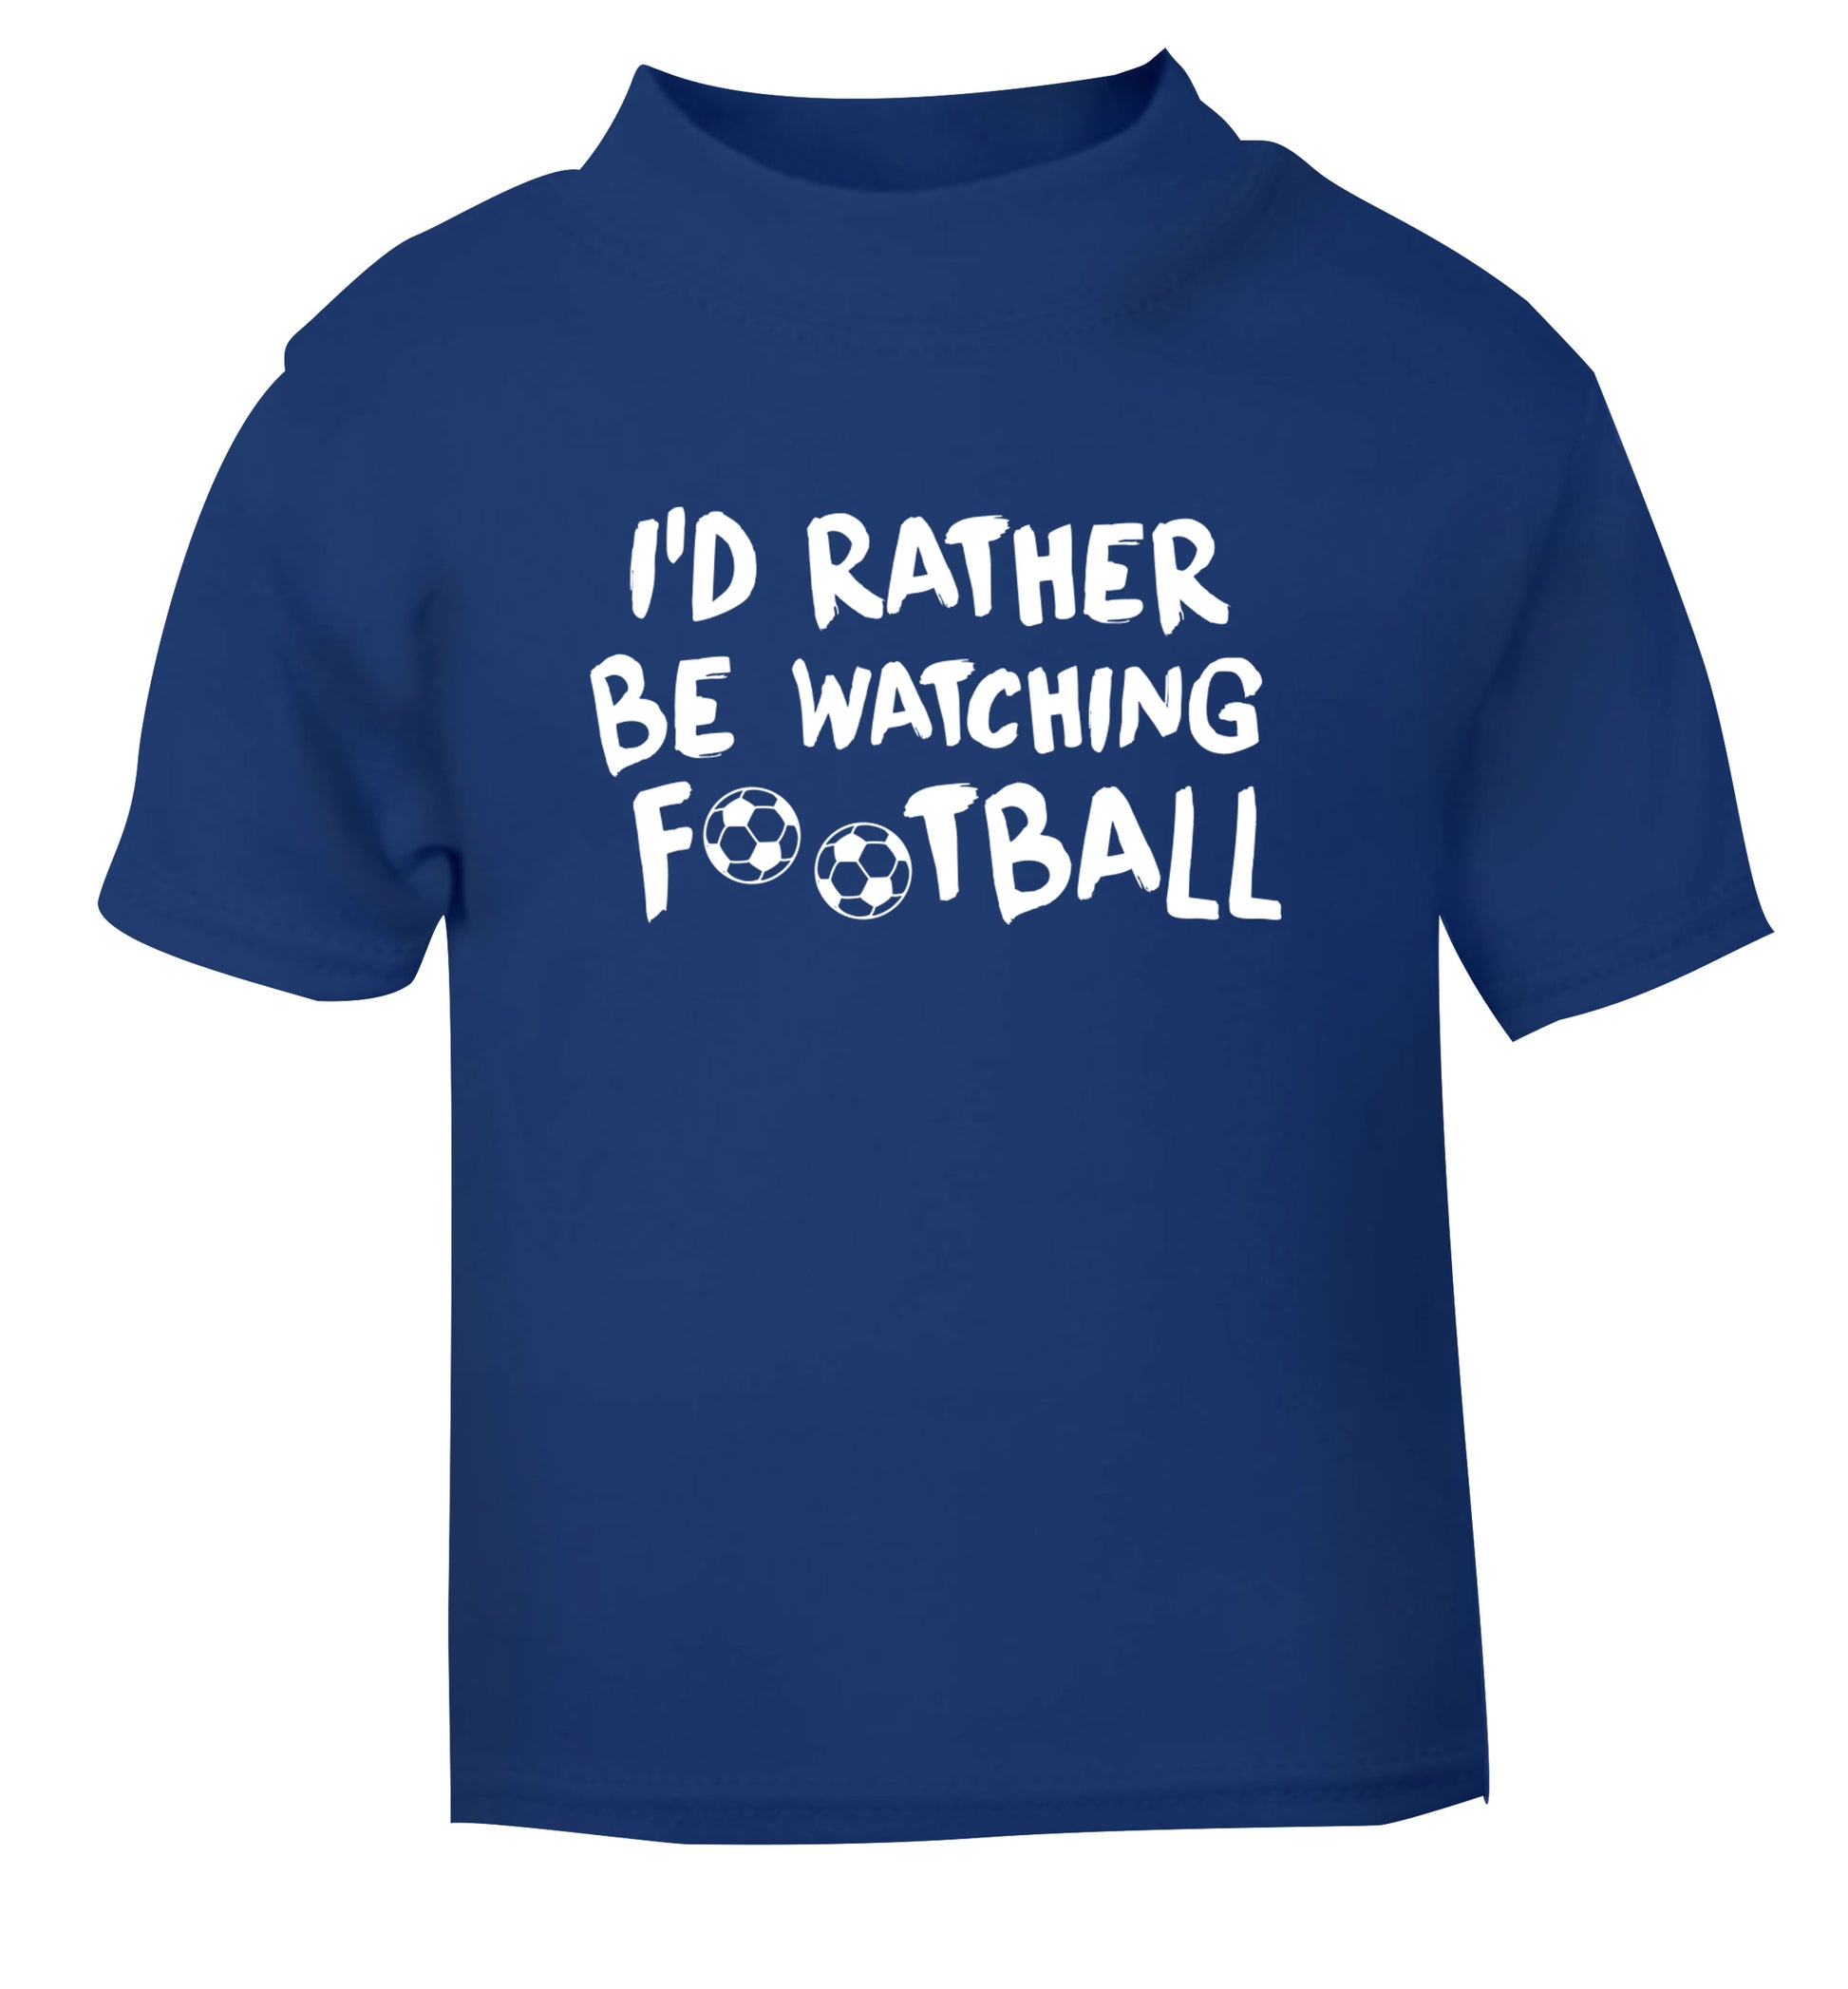 I'd rather be watching football blue Baby Toddler Tshirt 2 Years